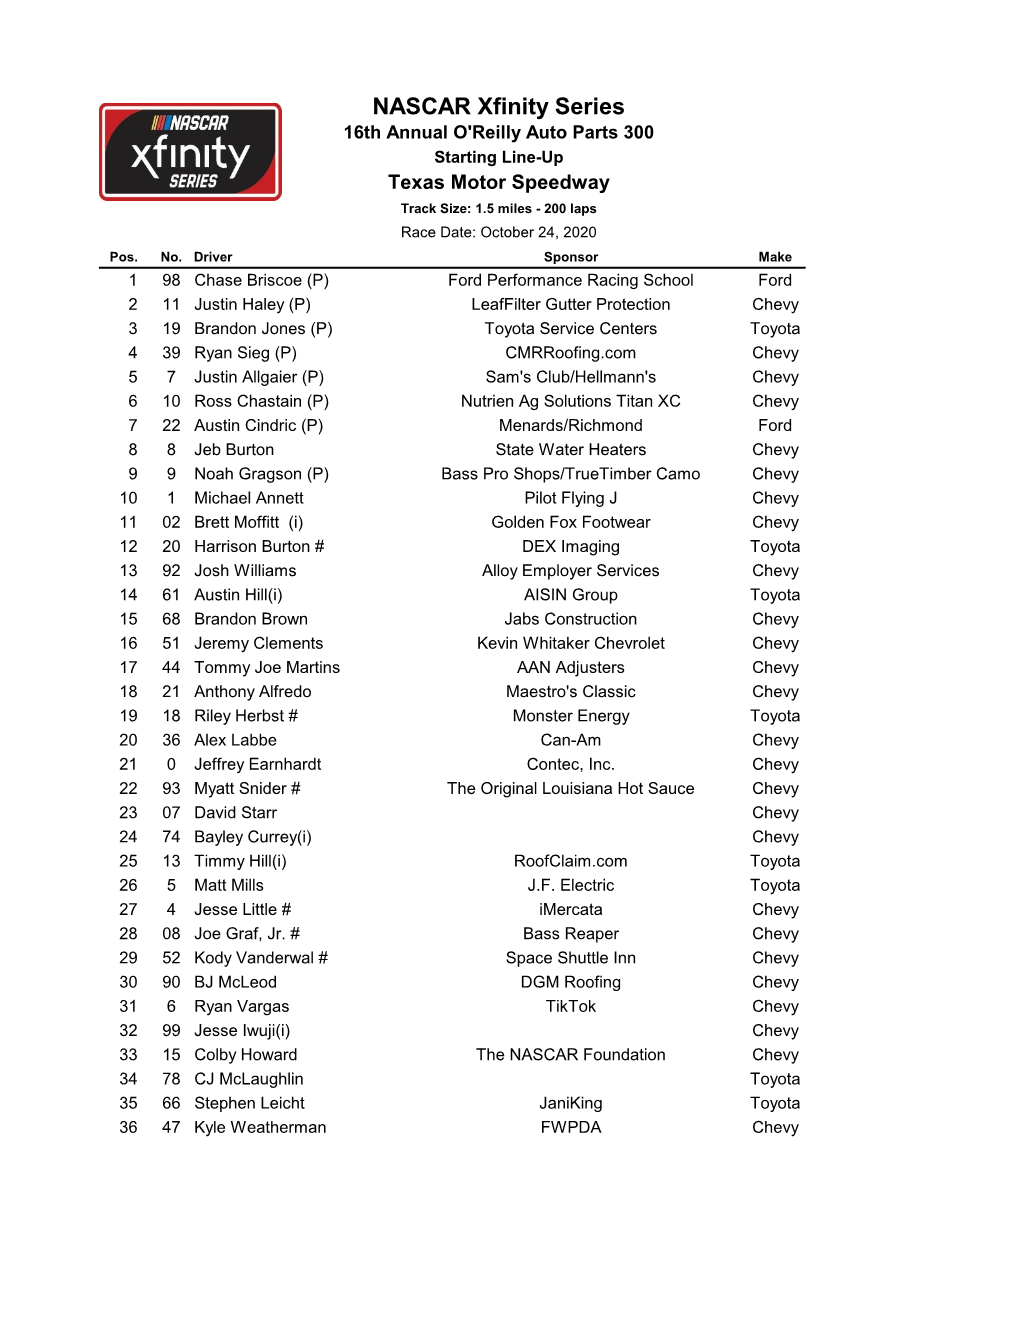 NASCAR Xfinity Series 16Th Annual O'reilly Auto Parts 300 Starting Line-Up Texas Motor Speedway Track Size: 1.5 Miles - 200 Laps Race Date: October 24, 2020 Pos